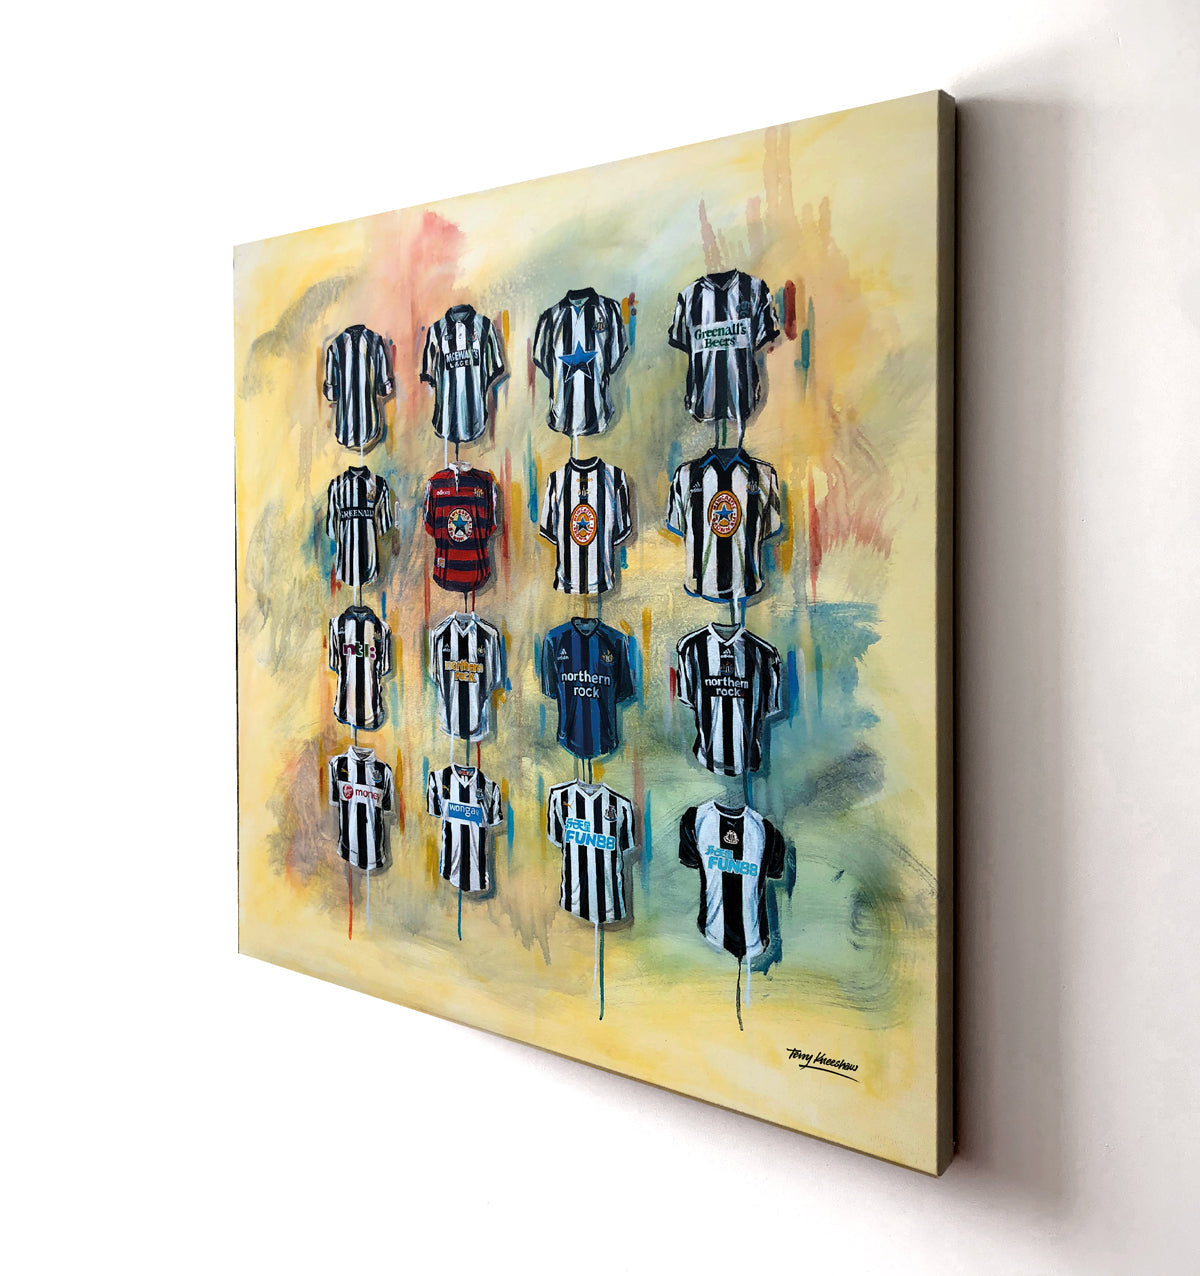 These Newcastle canvases from Terry Kneeshaw are perfect for any fan of the Magpies. Available in various sizes (20x20, 30x30, or 40x40) and framed or unframed in a black floating frame, the artwork features stunning images of the team and its players. Add a touch of Newcastle United to your home or office decor with these high-quality canvases. Perfect for displaying your support for the team in the 2022 season.